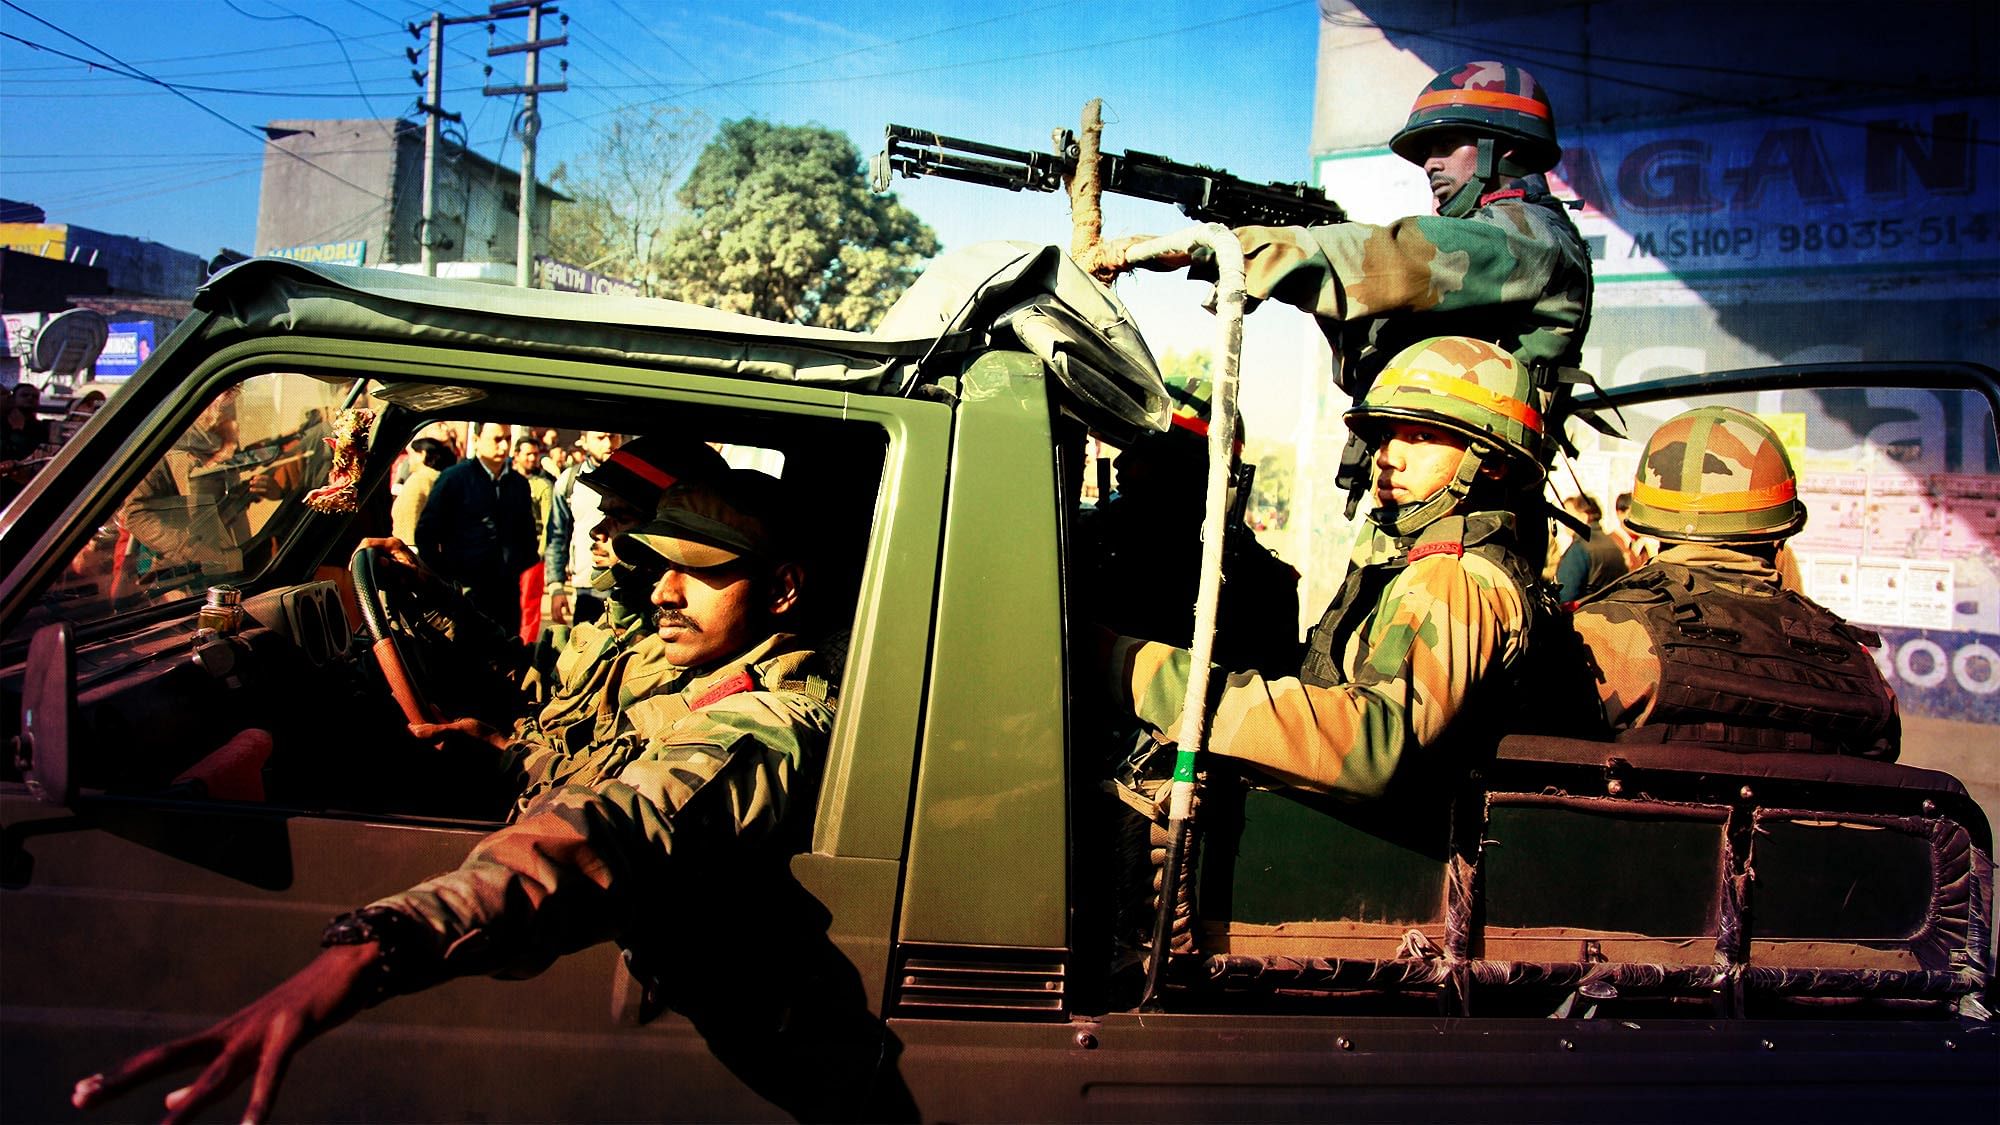 Armed forces during the counter-terror operation at Pathankot  (Photo treatment: <b>The Quint</b>)